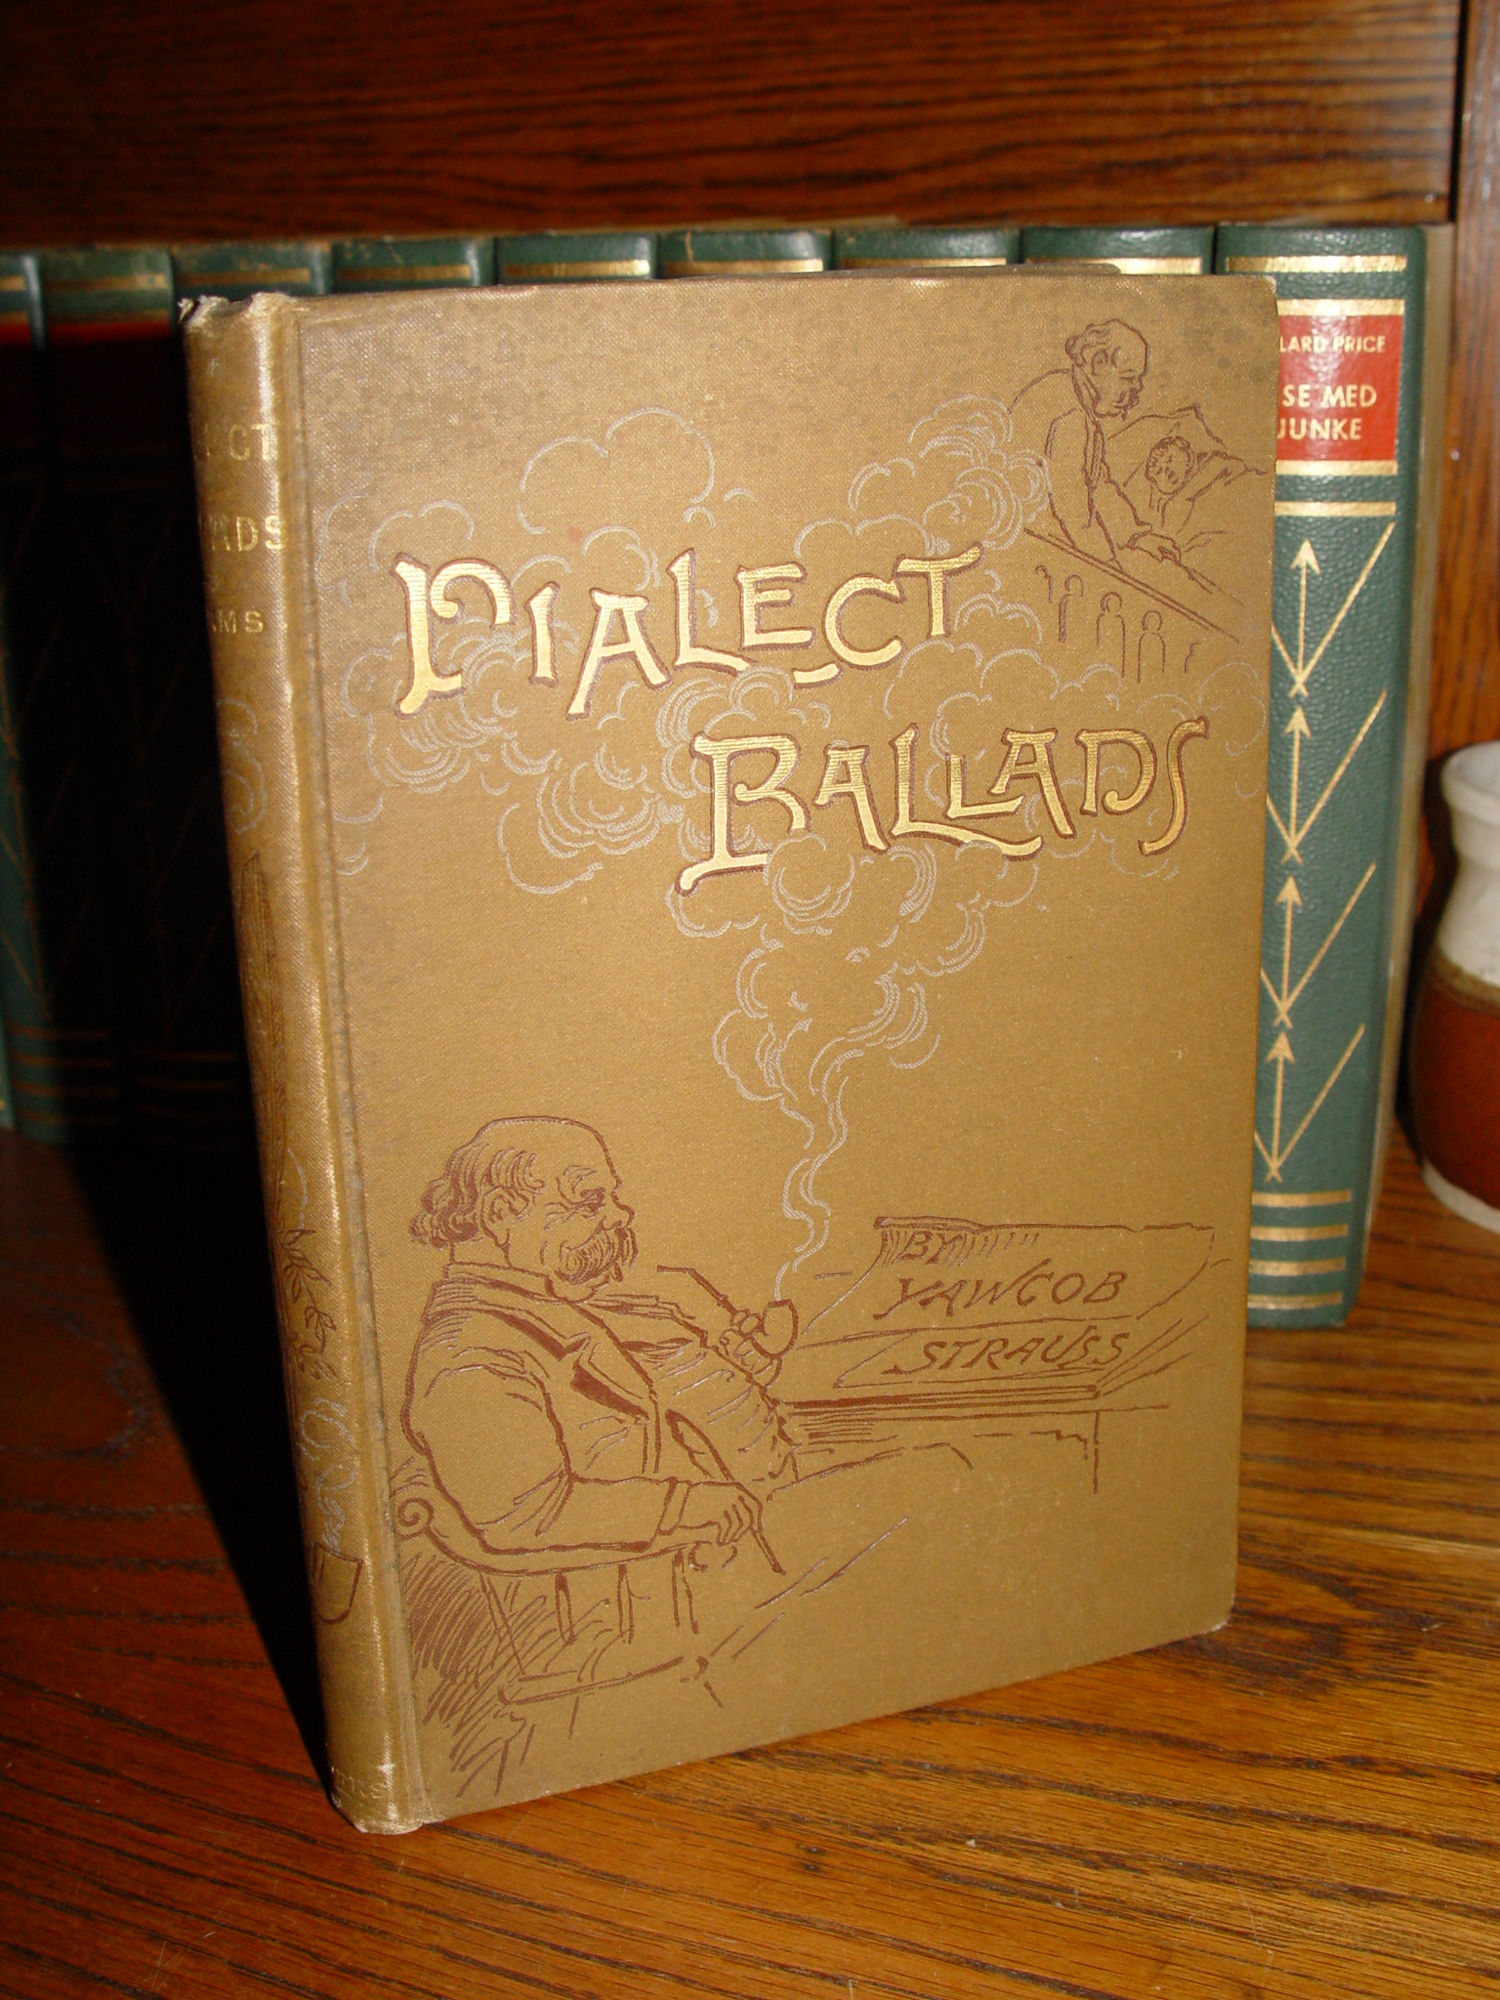 1888 Dialect Ballads by Charles Follen
                        Adams, illustrated by "Boz"